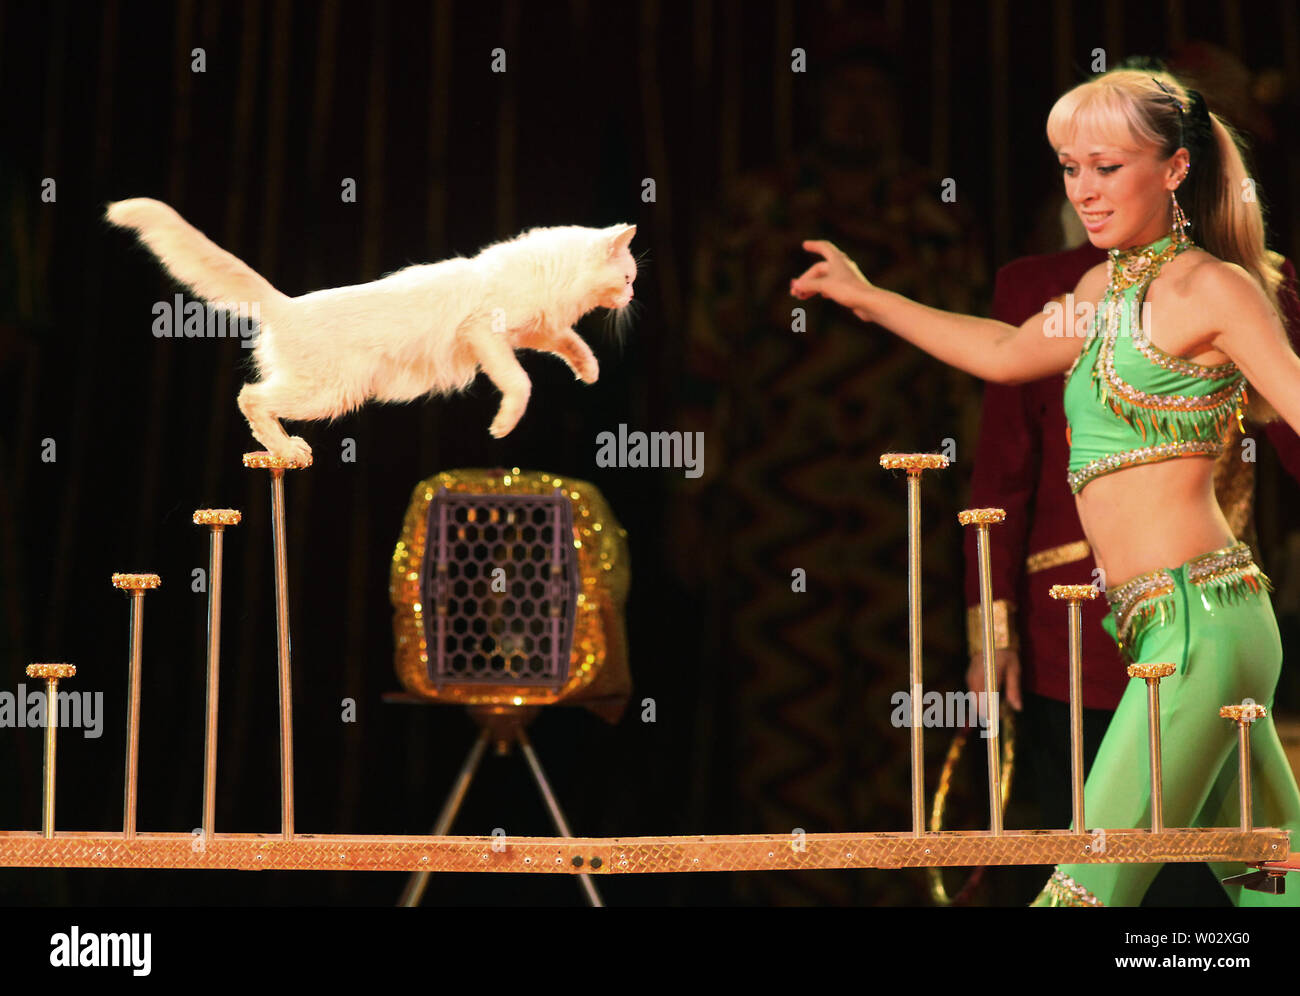 Russian animal trainers perform with cats in a Russian circus in Beijing on  August 26, 2009. UPI/Stephen Shaver Stock Photo - Alamy